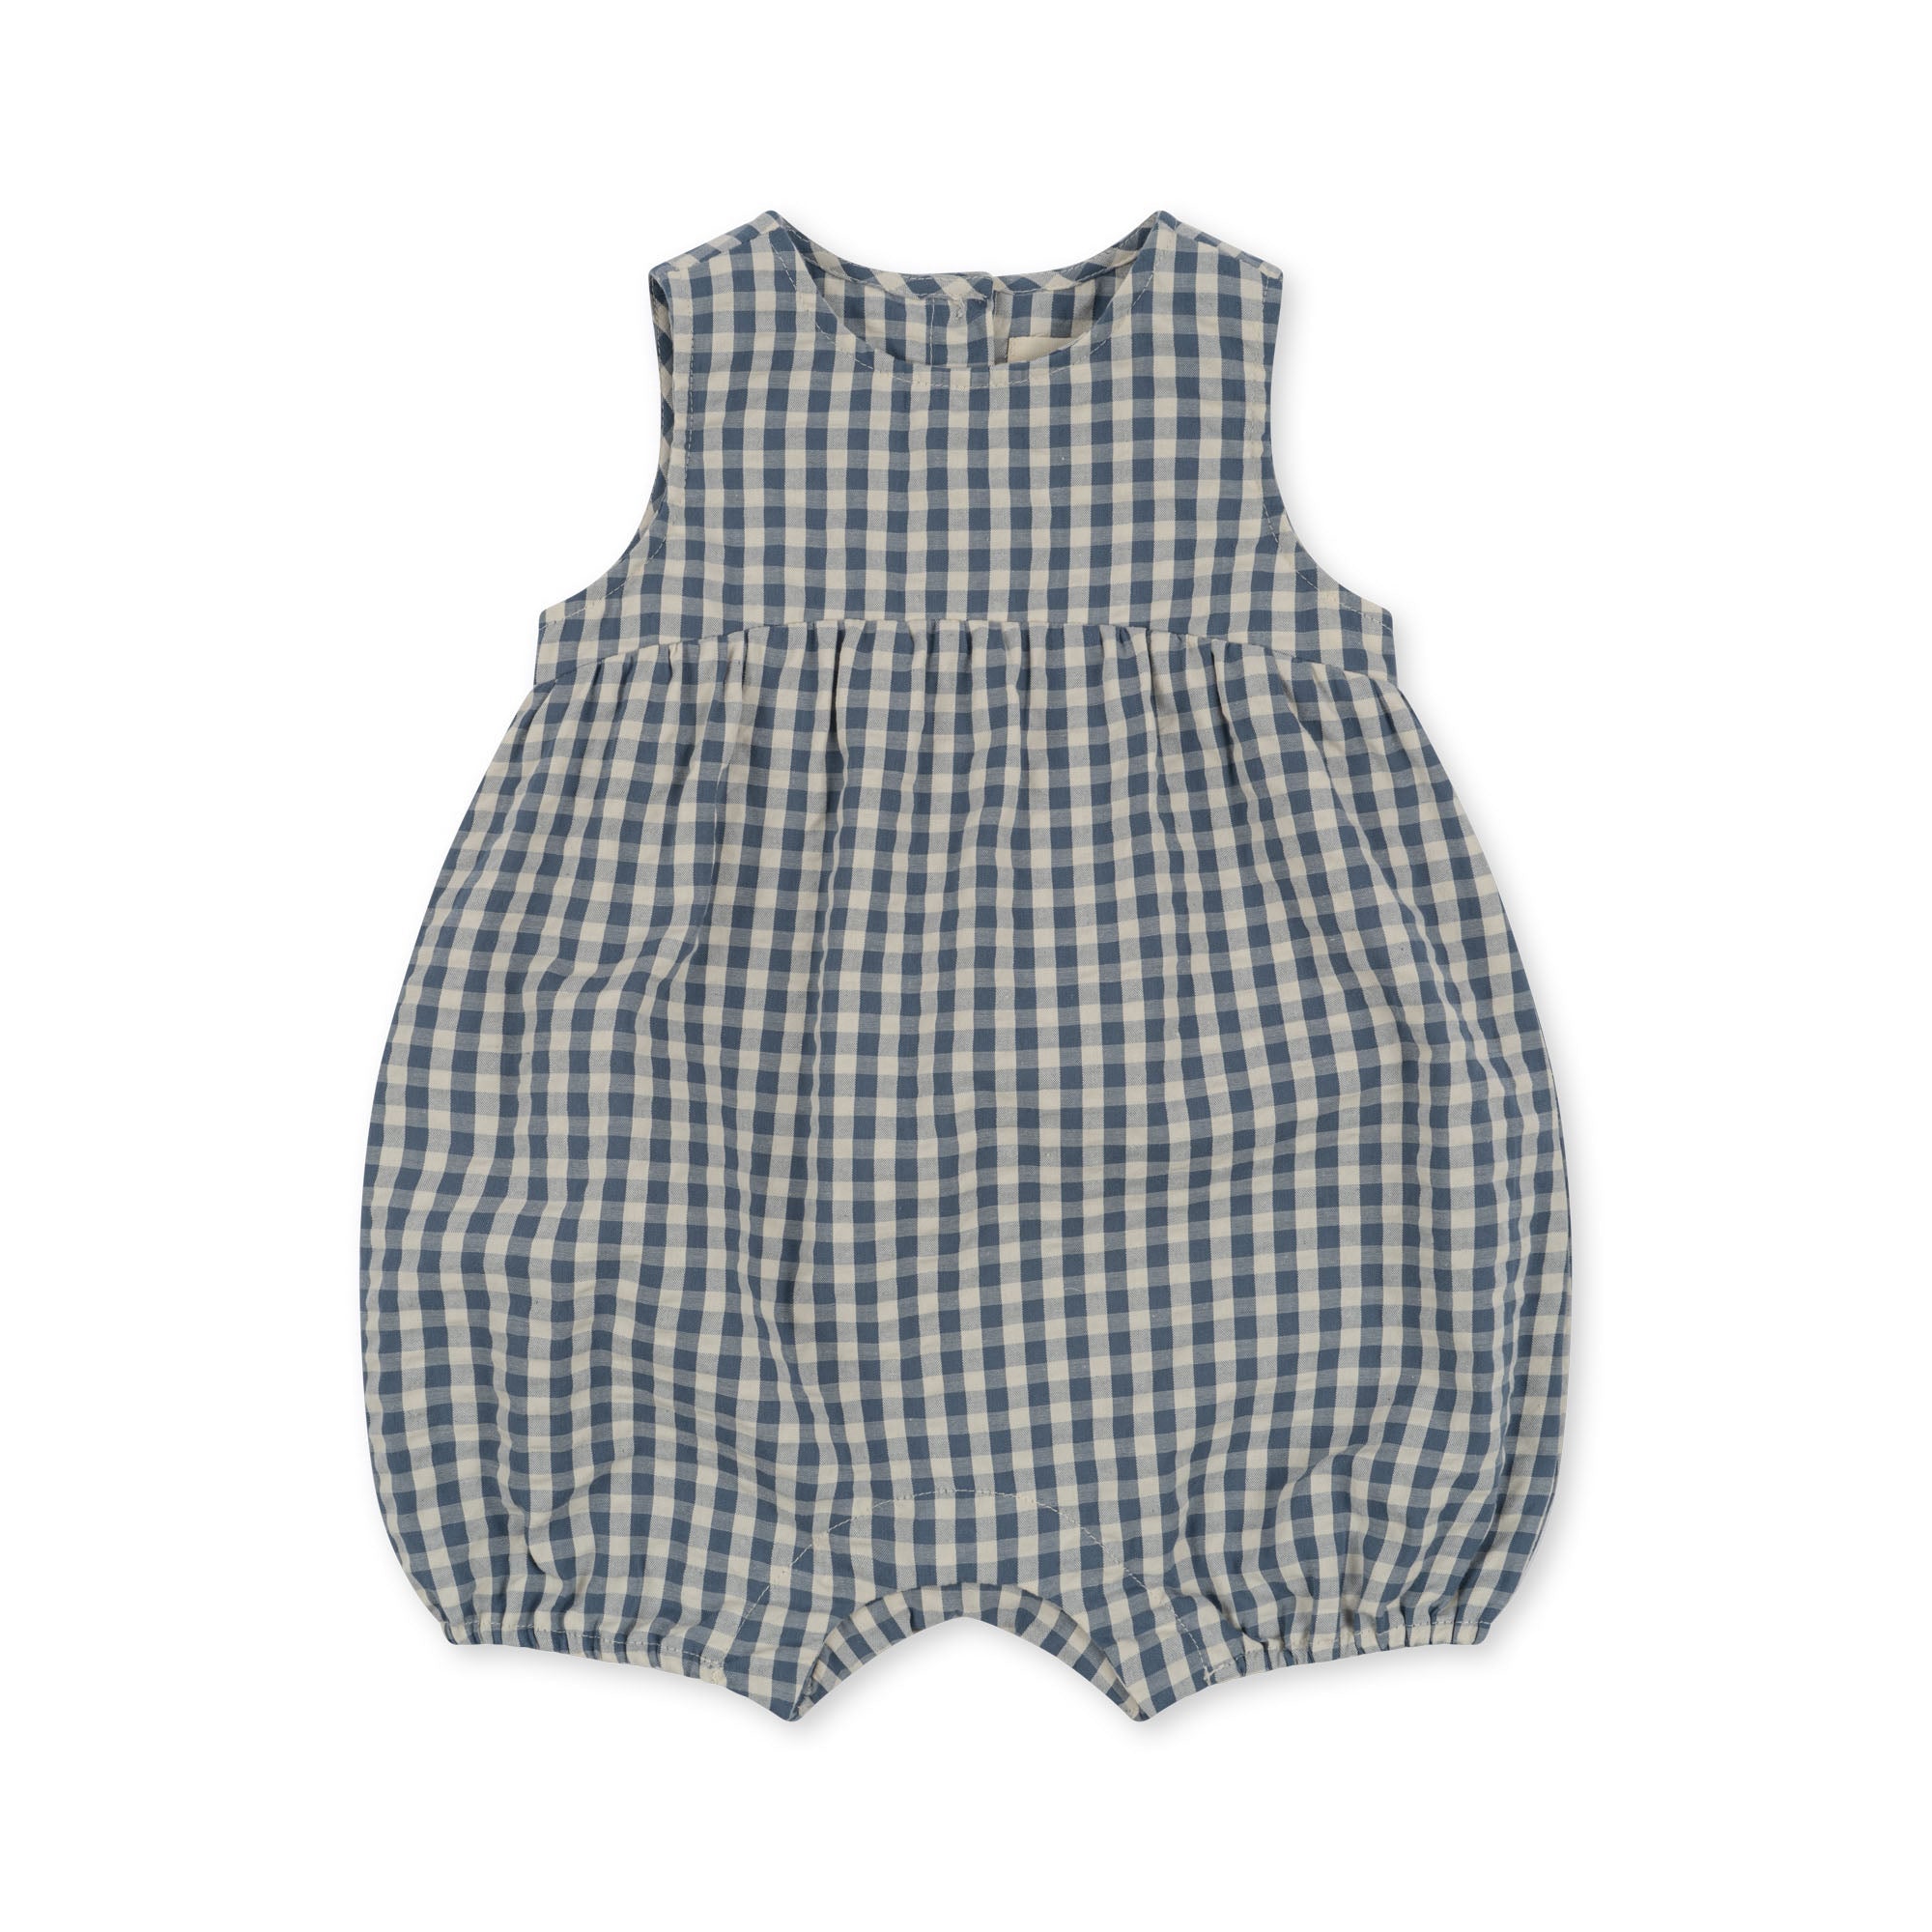 KIM_ROMPER-Rompers_and_jumpsuits_-_Woven-KS100331-CAPTAINS_BLUE_CHECK.jpg